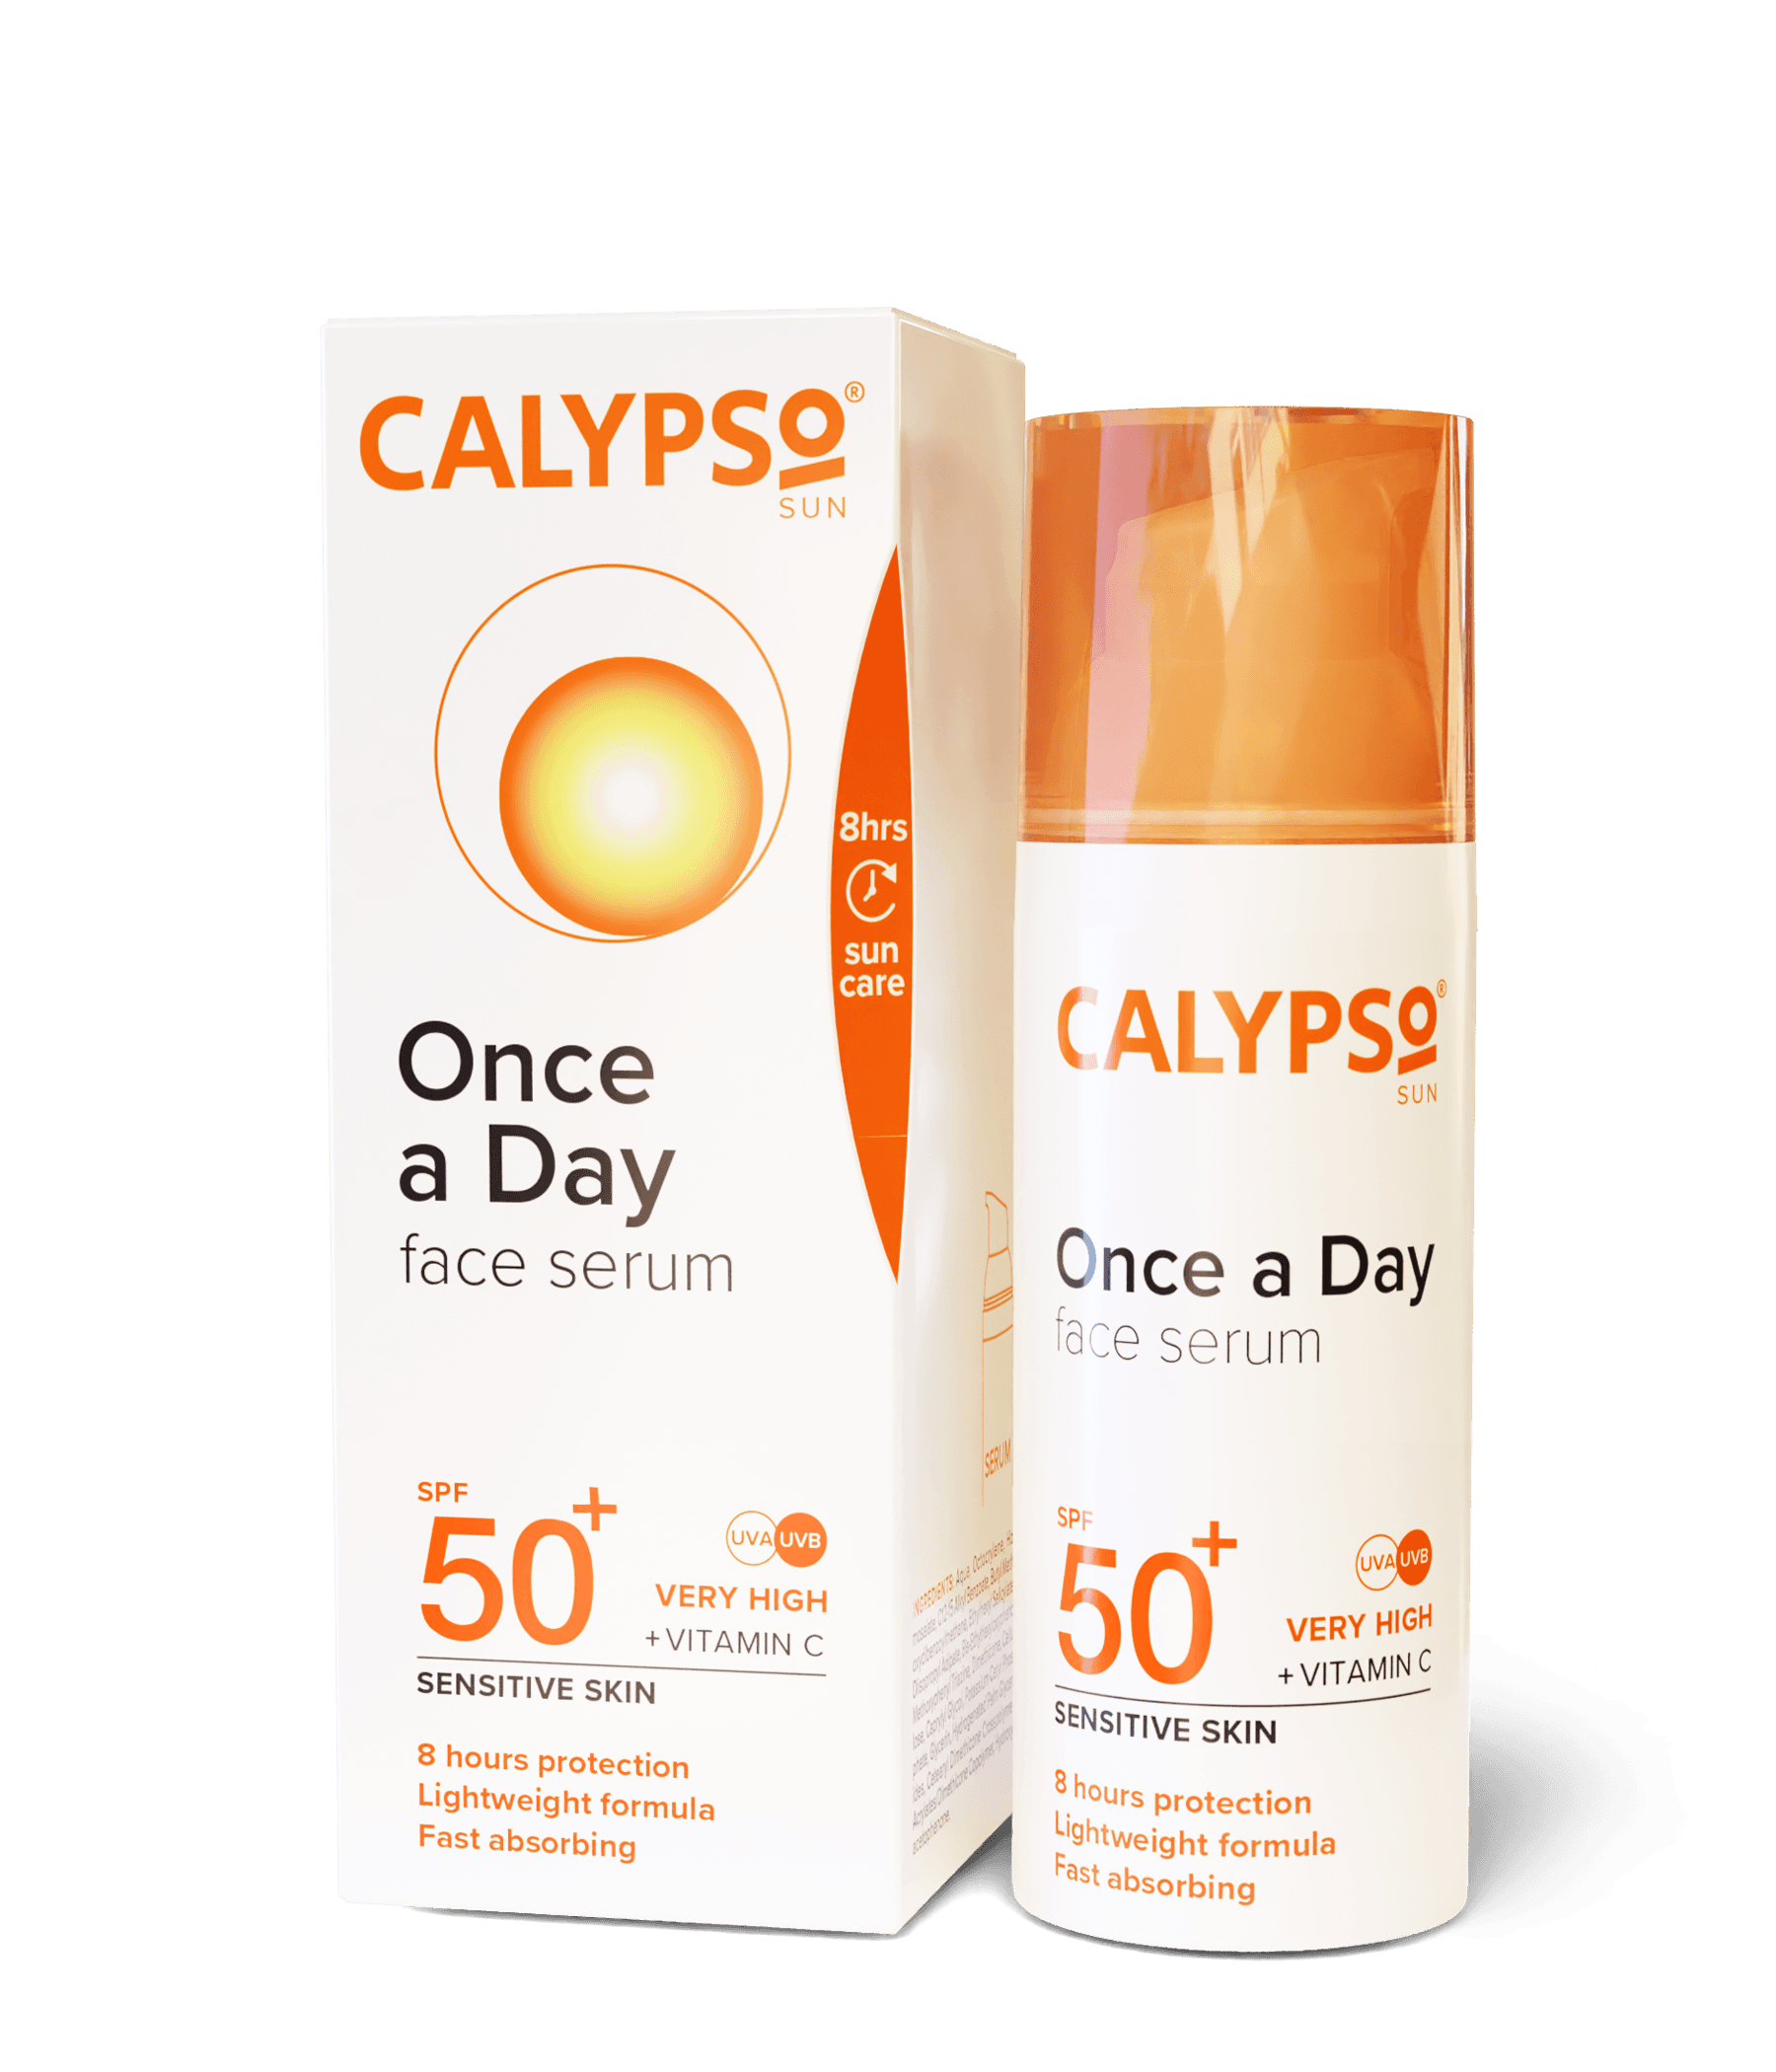 Calypso Once a Day Serum SPF50+ with vitamin c, box and bottle